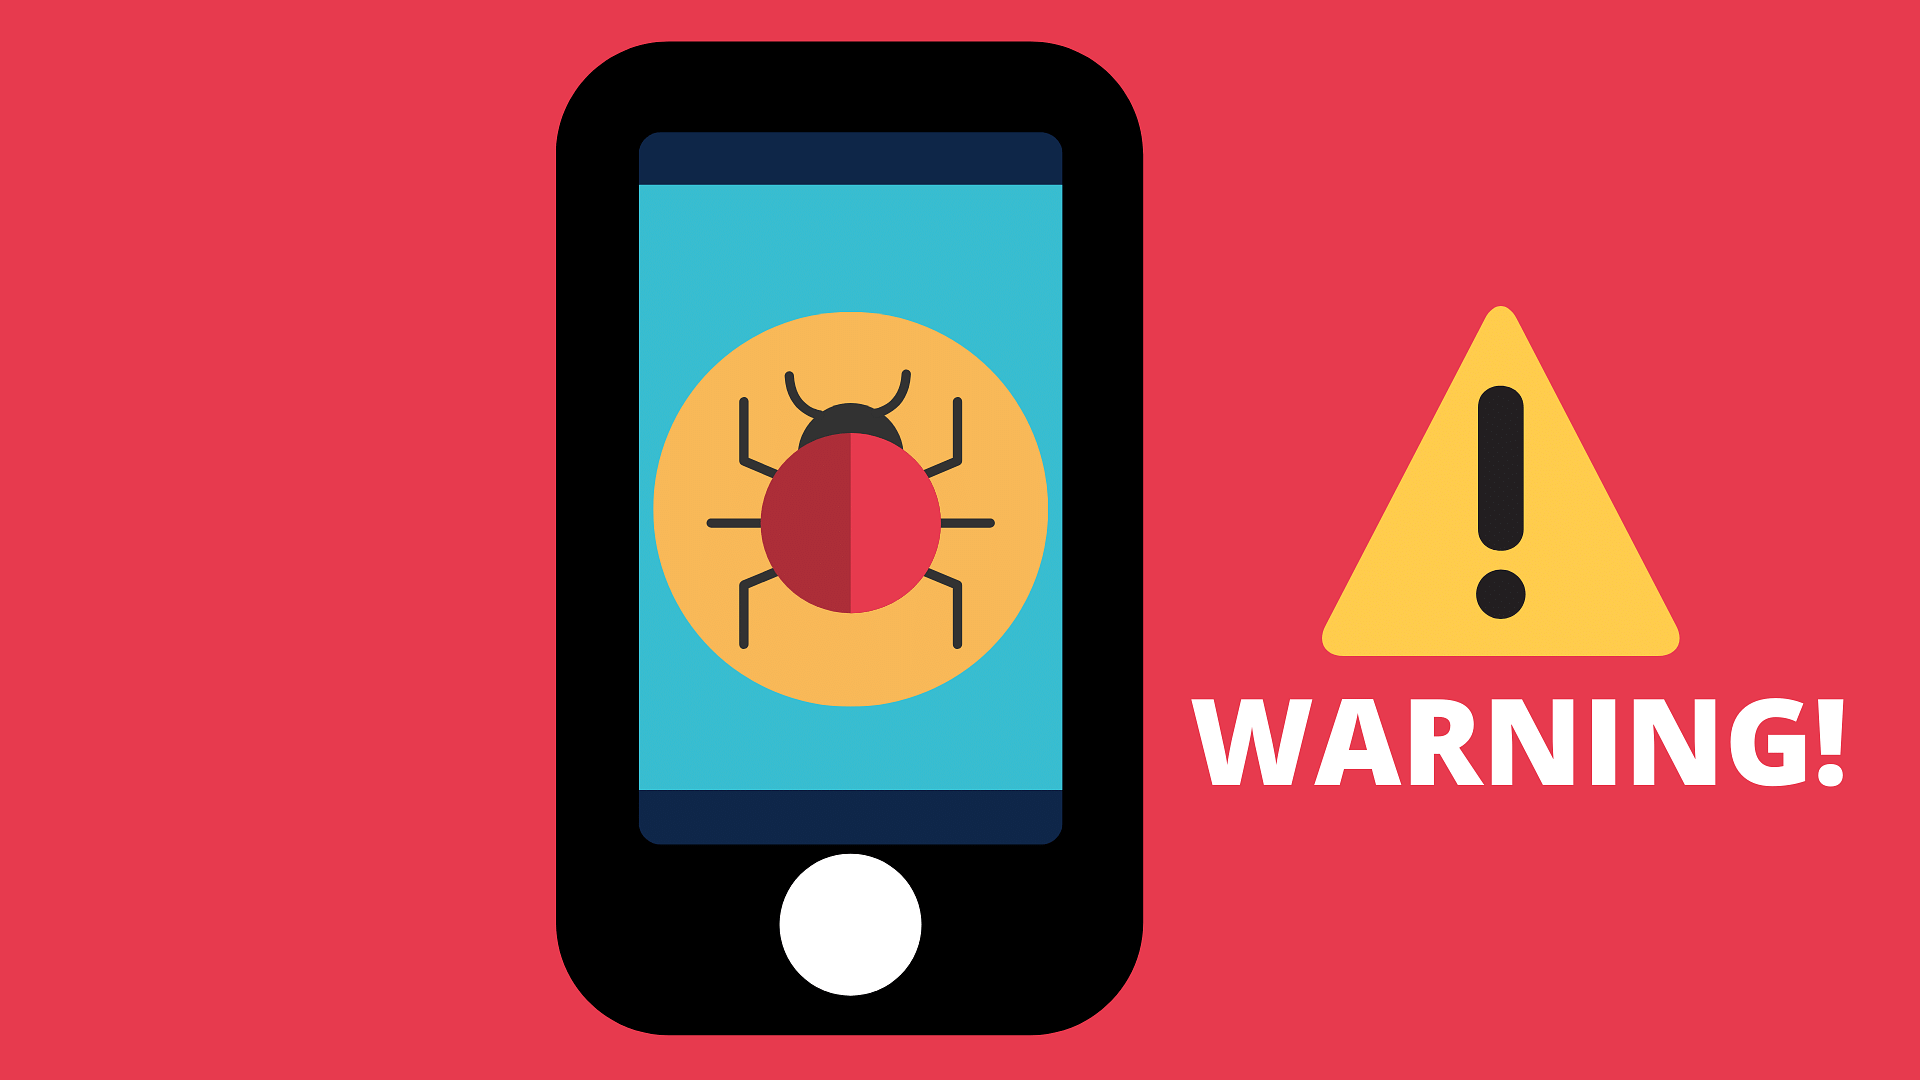 A total of 11 apps on the Google PlayStore were suspected to be infected with the Joker malware.&nbsp;